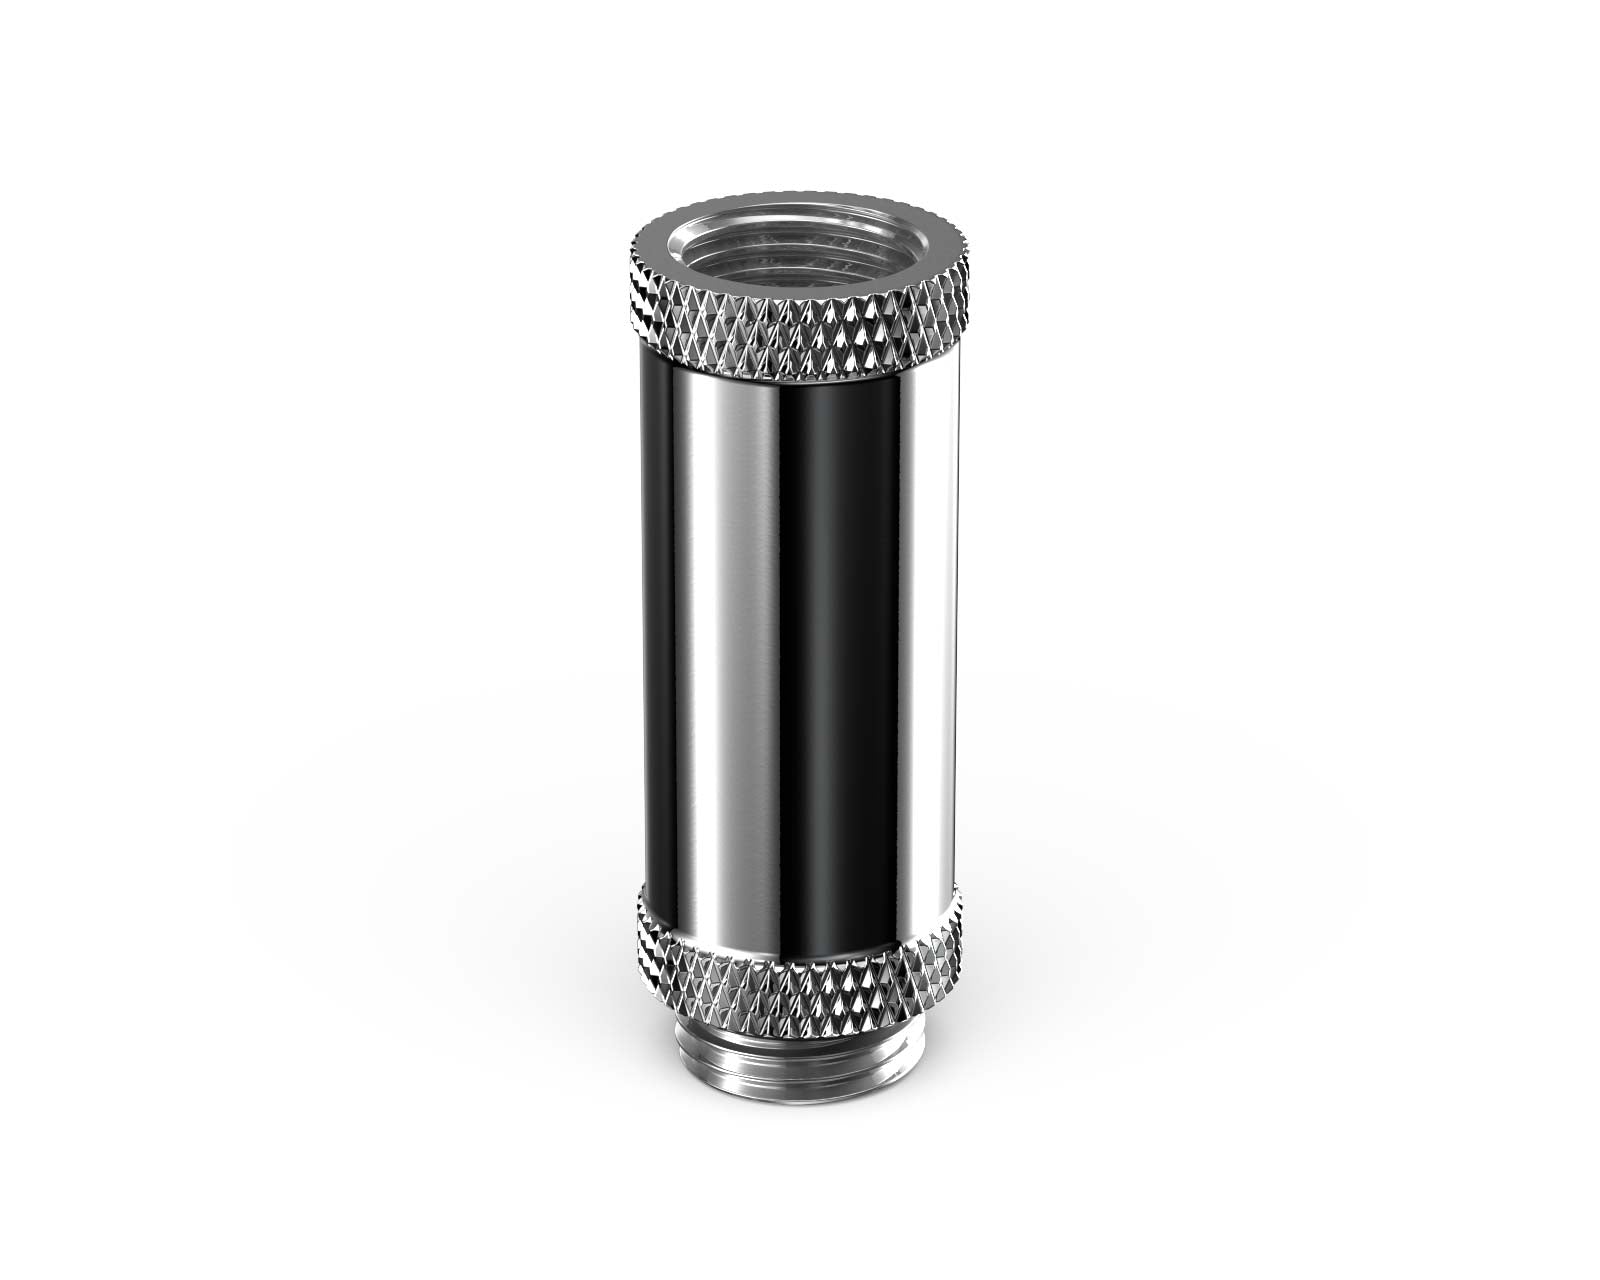 PrimoChill Male to Female G 1/4in. 40mm SX Extension Coupler - PrimoChill - KEEPING IT COOL Silver Nickel